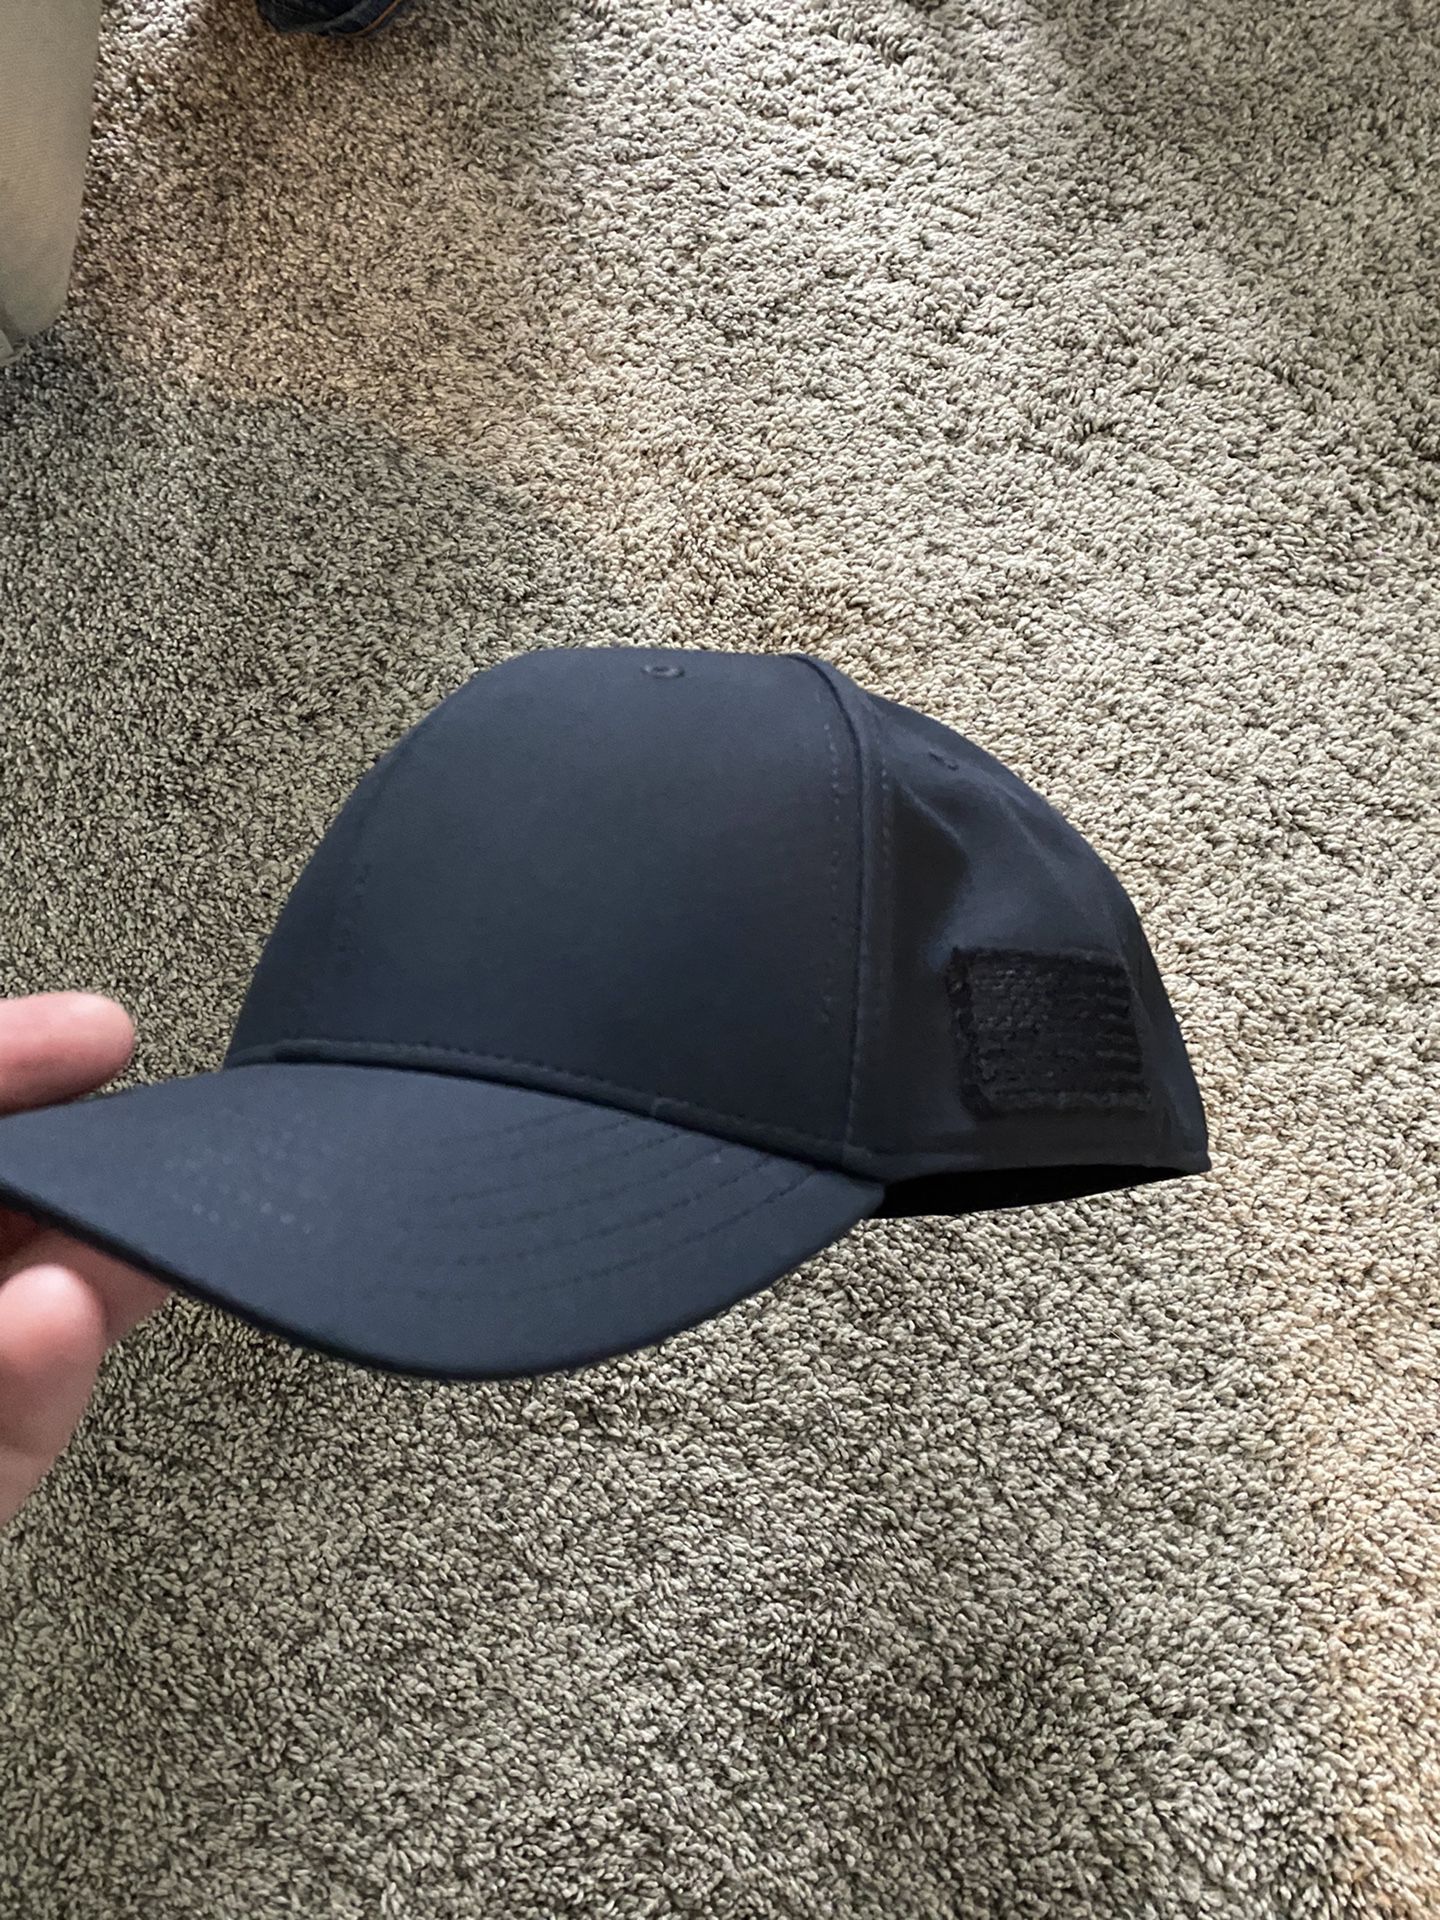 New NWT Under Armour Fitted XL/XXL Hat Cap